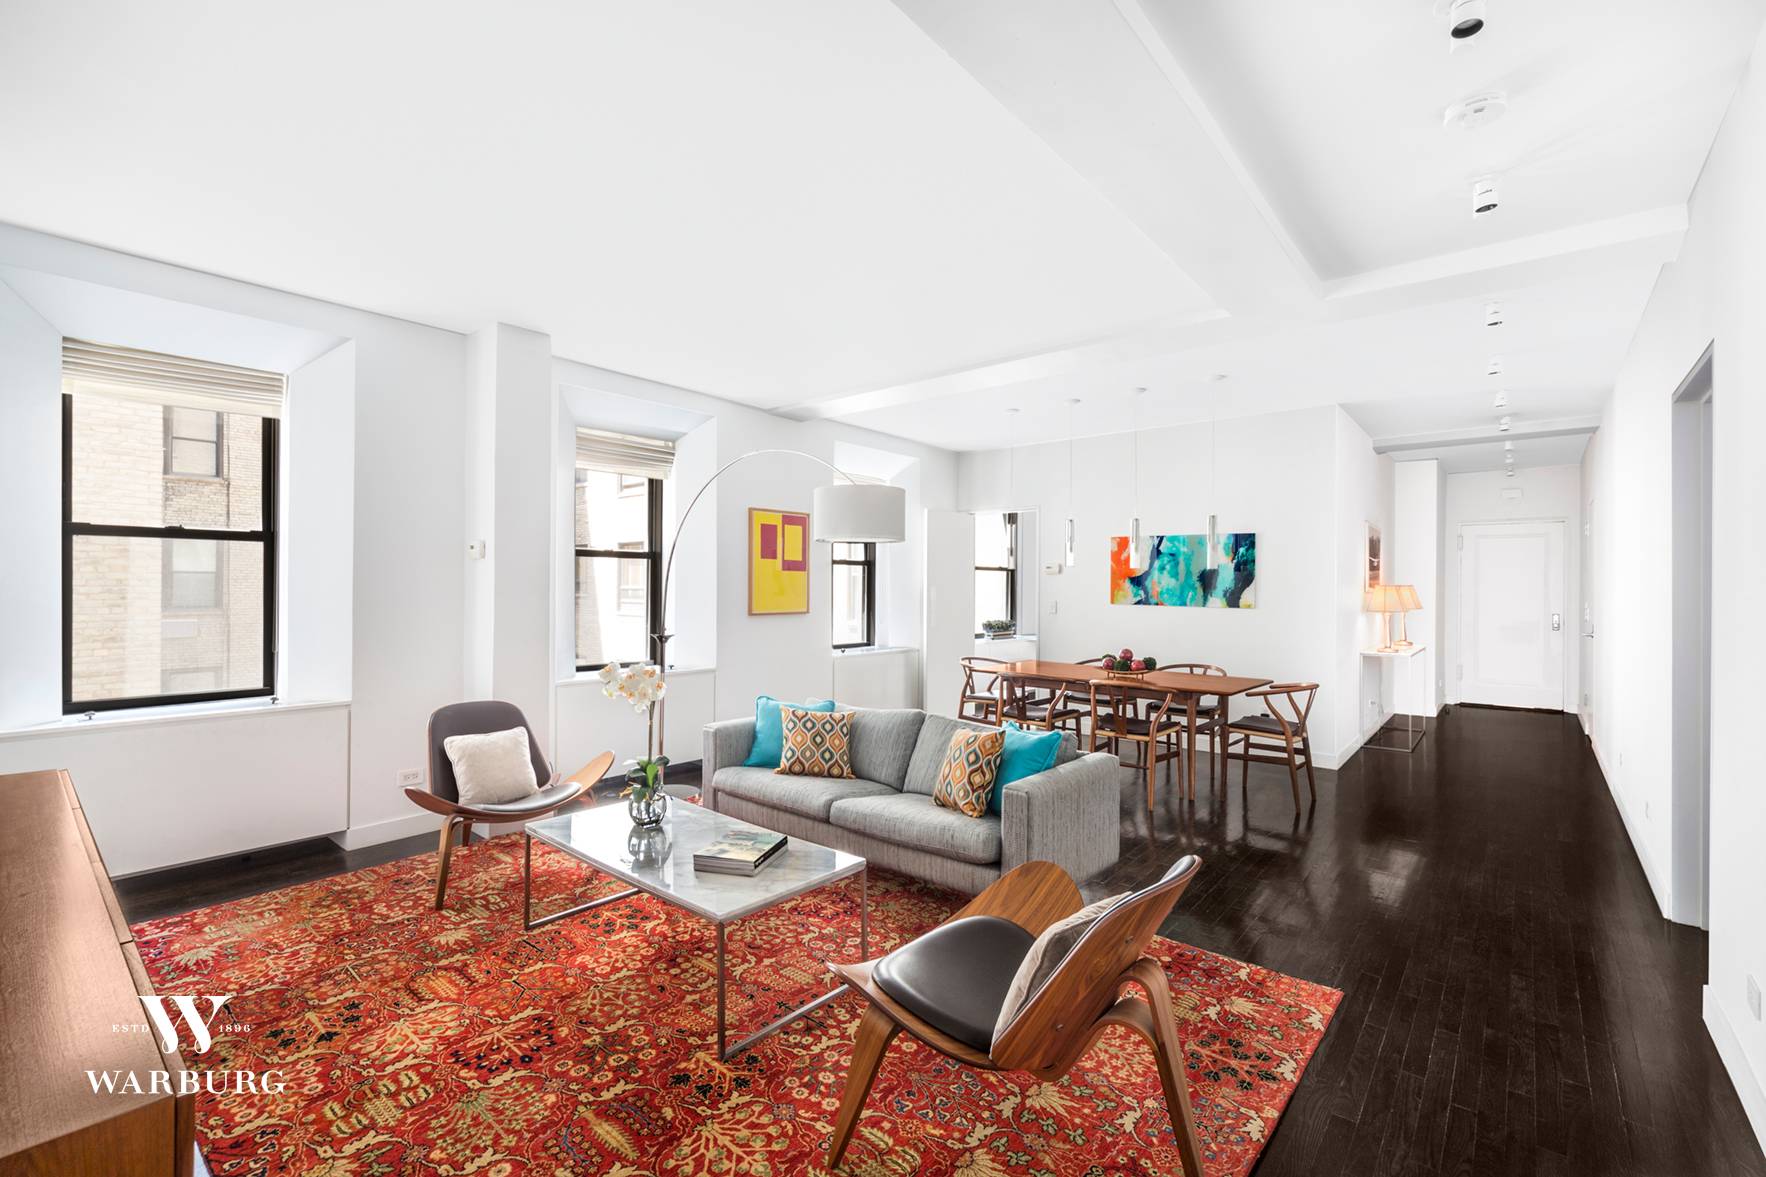 Fifth Avenue Masterpiece across from the Metropolitan Museum and Central Park This elegant and meticulously renovated 3 bedroom, 3 bath pre war coop has it all.